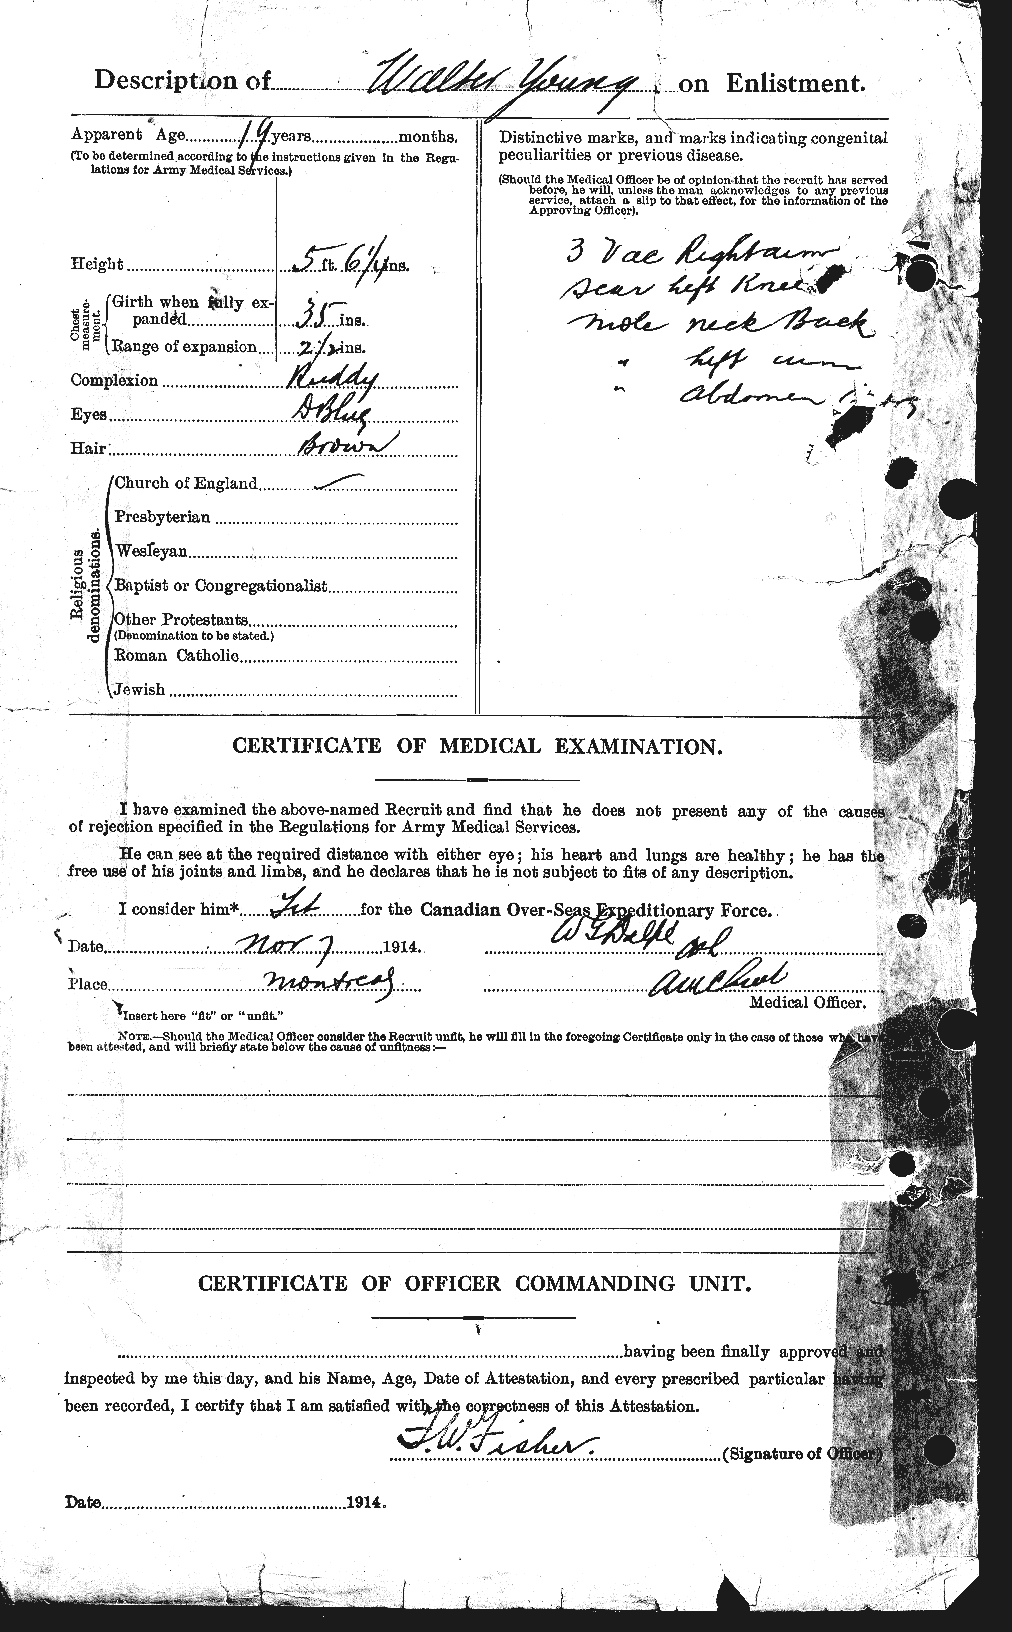 Personnel Records of the First World War - CEF 692433b